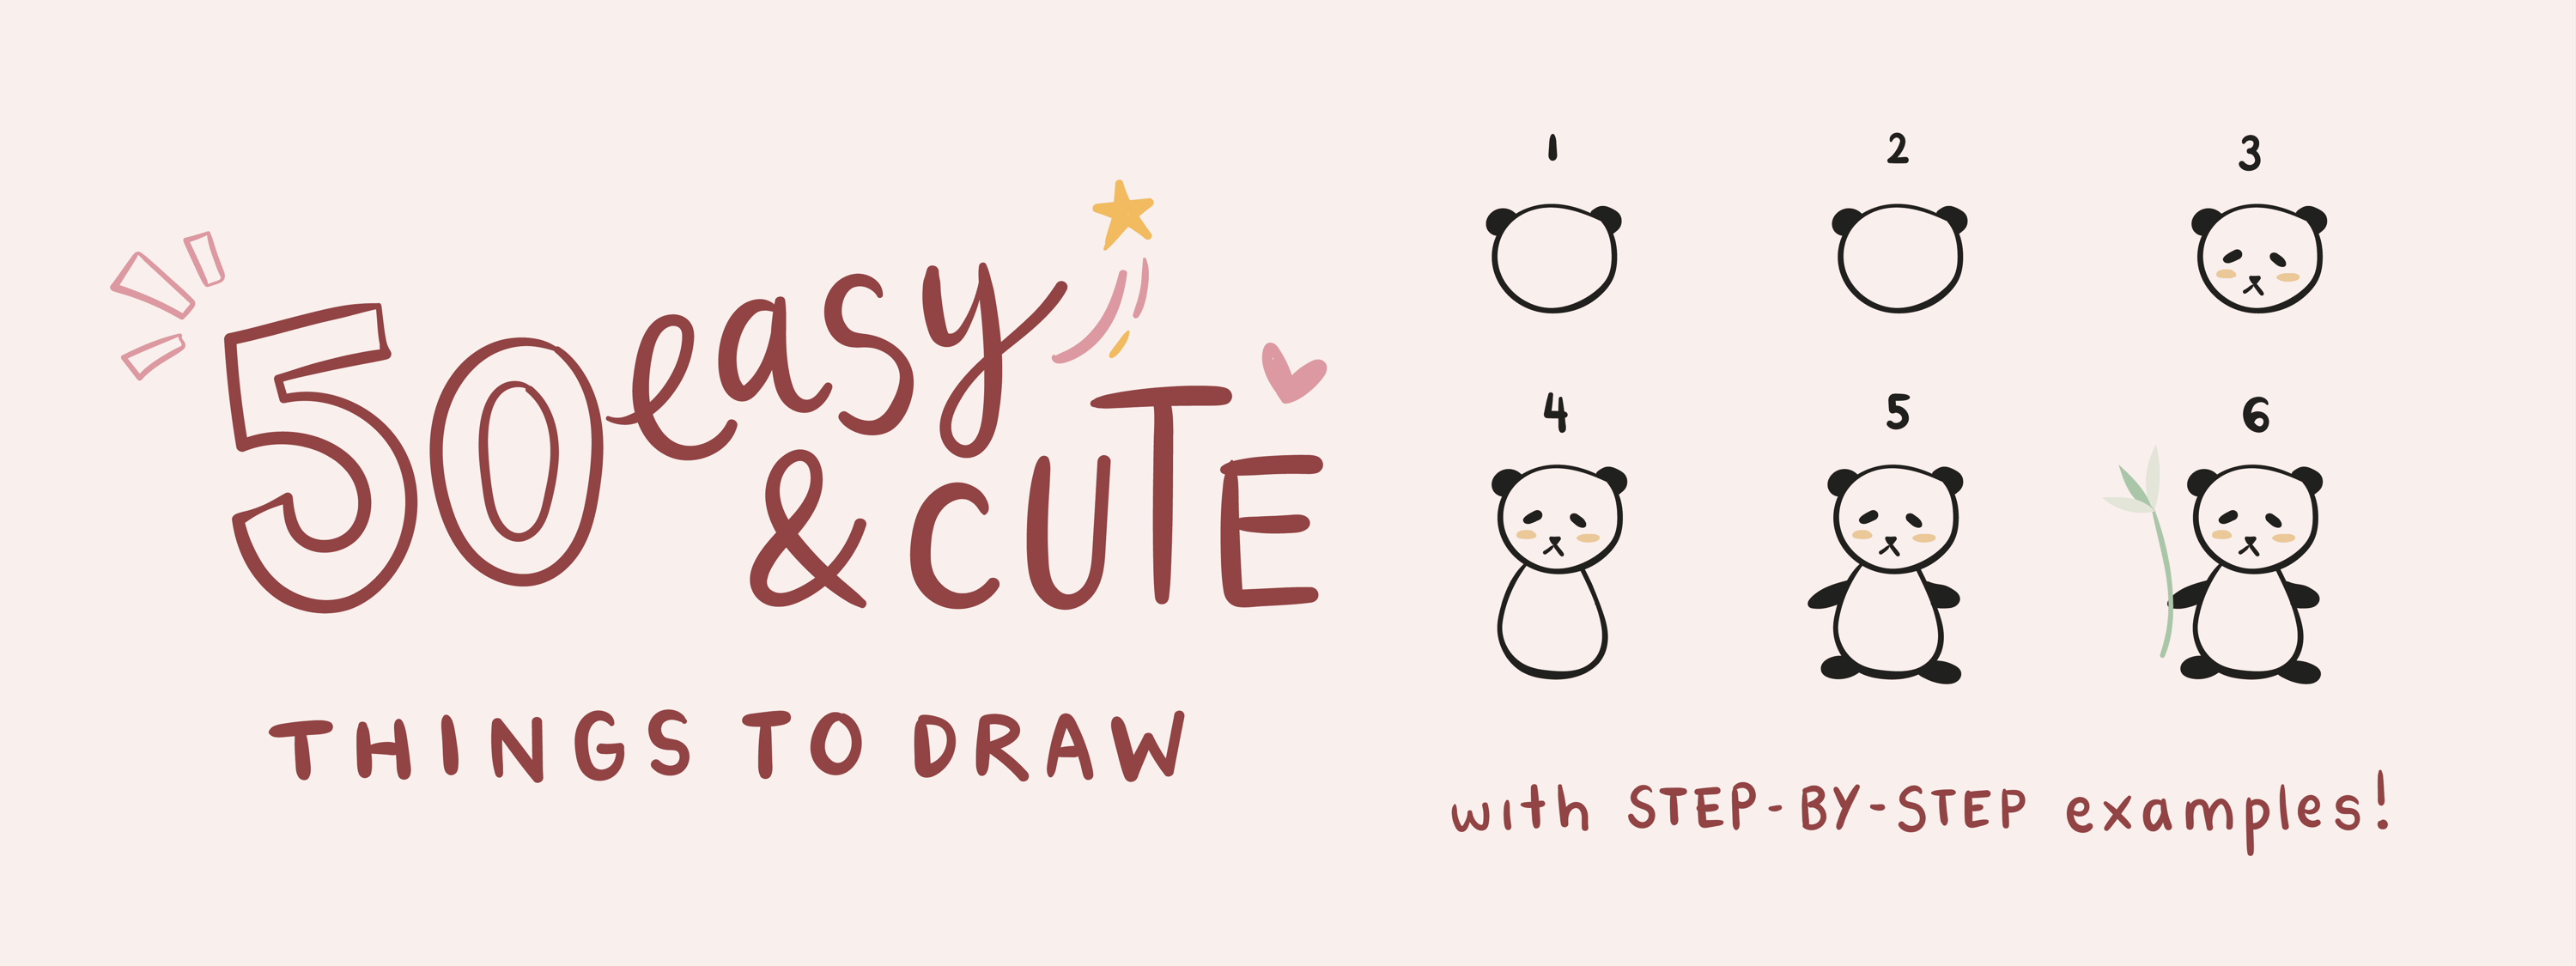 50 Easy + cute things to draw